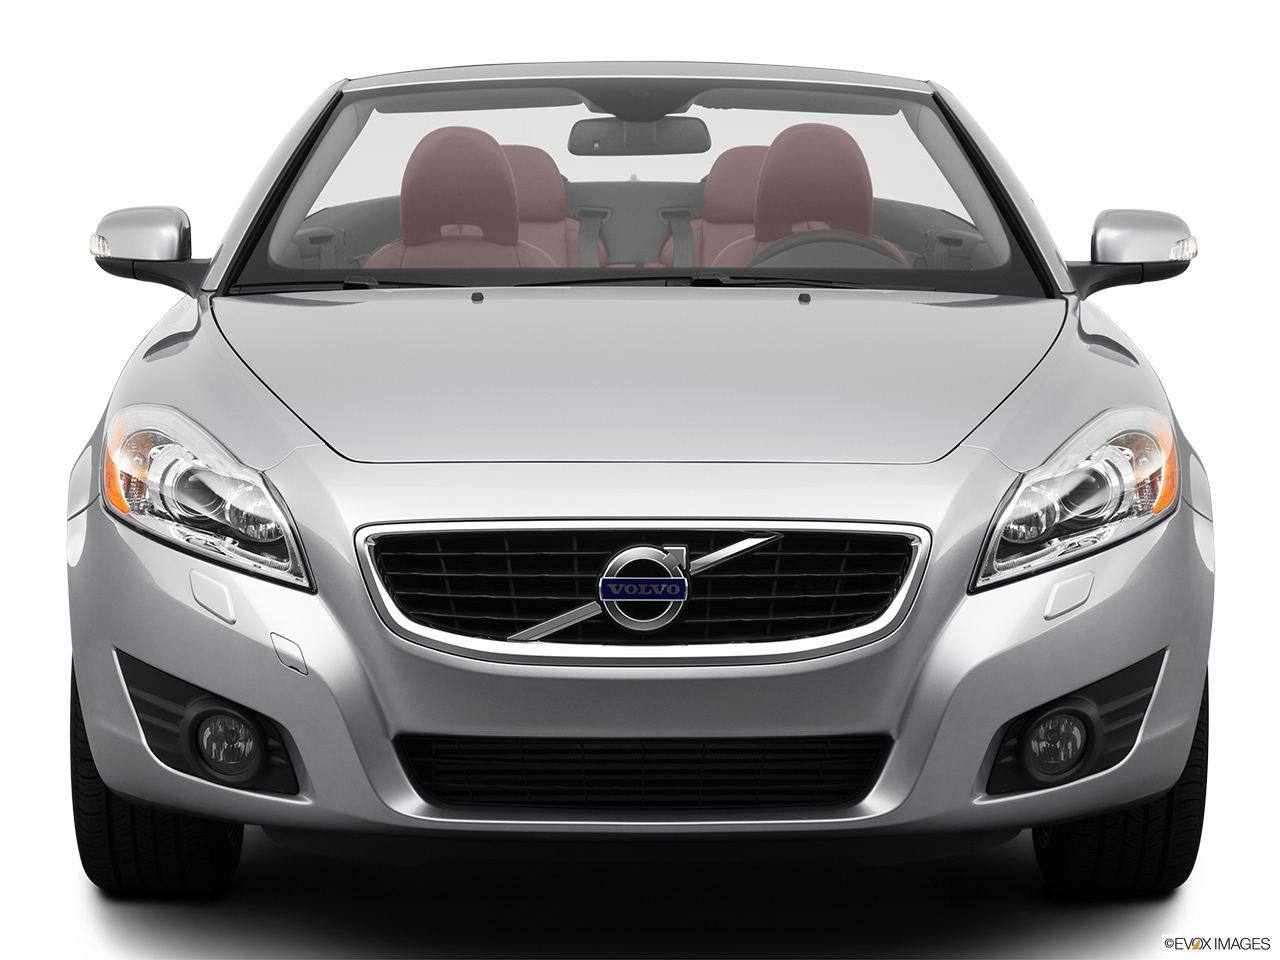 2012 Volvo C70 T5 Low/wide front. 